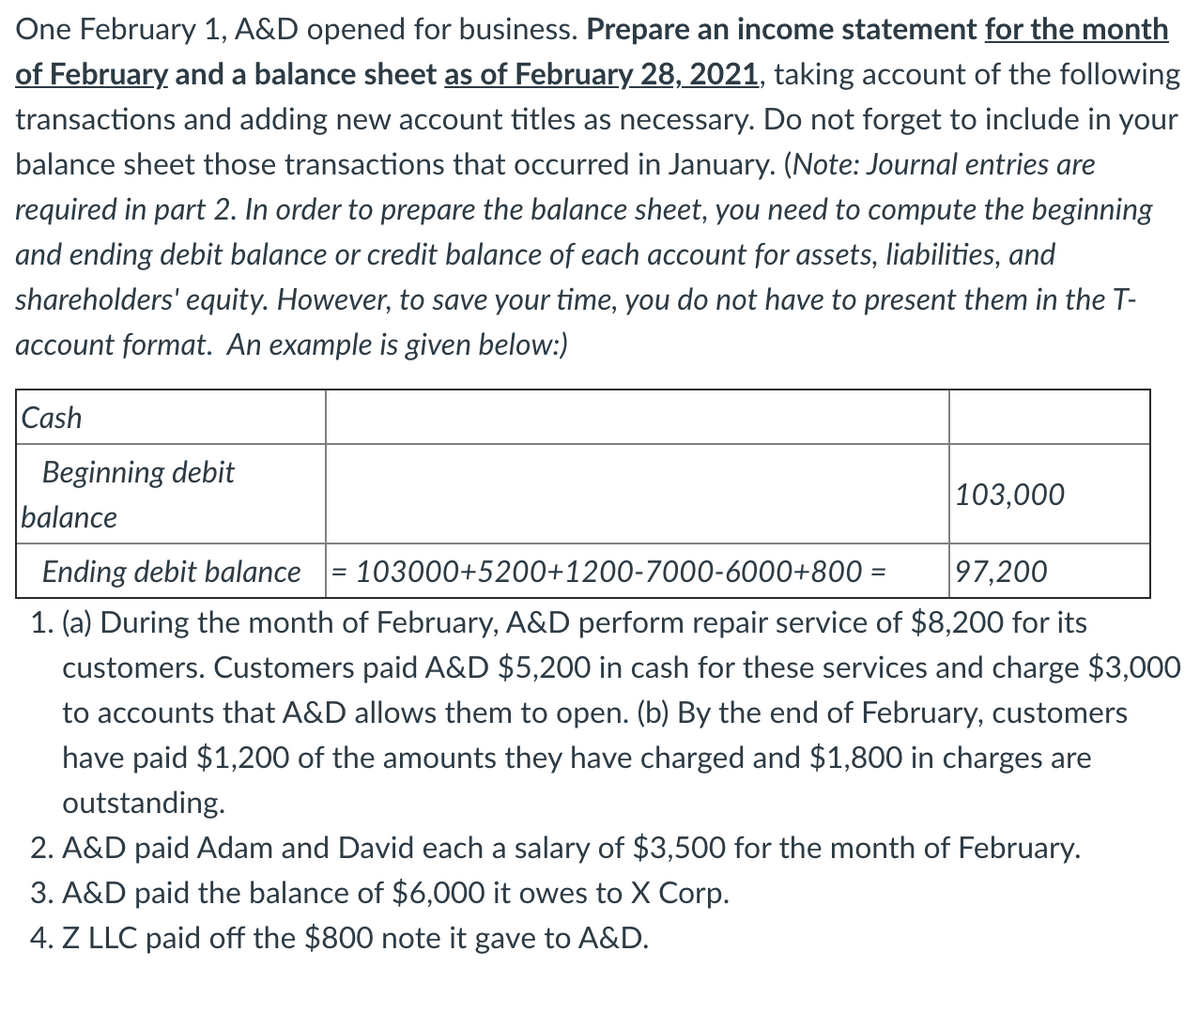 One February 1, A&D opened for business. Prepare an income statement for the month
of February and a balance sheet as of February 28, 2021, taking account of the following
transactions and adding new account titles as necessary. Do not forget to include in your
balance sheet those transactions that occurred in January. (Note: Journal entries are
required in part 2. In order to prepare the balance sheet, you need to compute the beginning
and ending debit balance or credit balance of each account for assets, liabilities, and
shareholders' equity. However, to save your time, you do not have to present them in the T-
account format. An example is given below:)
Cash
Beginning debit
balance
103,000
Ending debit balance = 103000+5200+1200-7000-6000+800 =
97,200
%3D
1. (a) During the month of February, A&D perform repair service of $8,200 for its
customers. Customers paid A&D $5,200 in cash for these services and charge $3,000
to accounts that A&D allows them to open. (b) By the end of February, customers
have paid $1,200 of the amounts they have charged and $1,800 in charges are
outstanding.
2. A&D paid Adam and David each a salary of $3,500 for the month of February.
3. A&D paid the balance of $6,000 it owes to X Corp.
4. Z LLC paid off the $800 note it gave to A&D.
